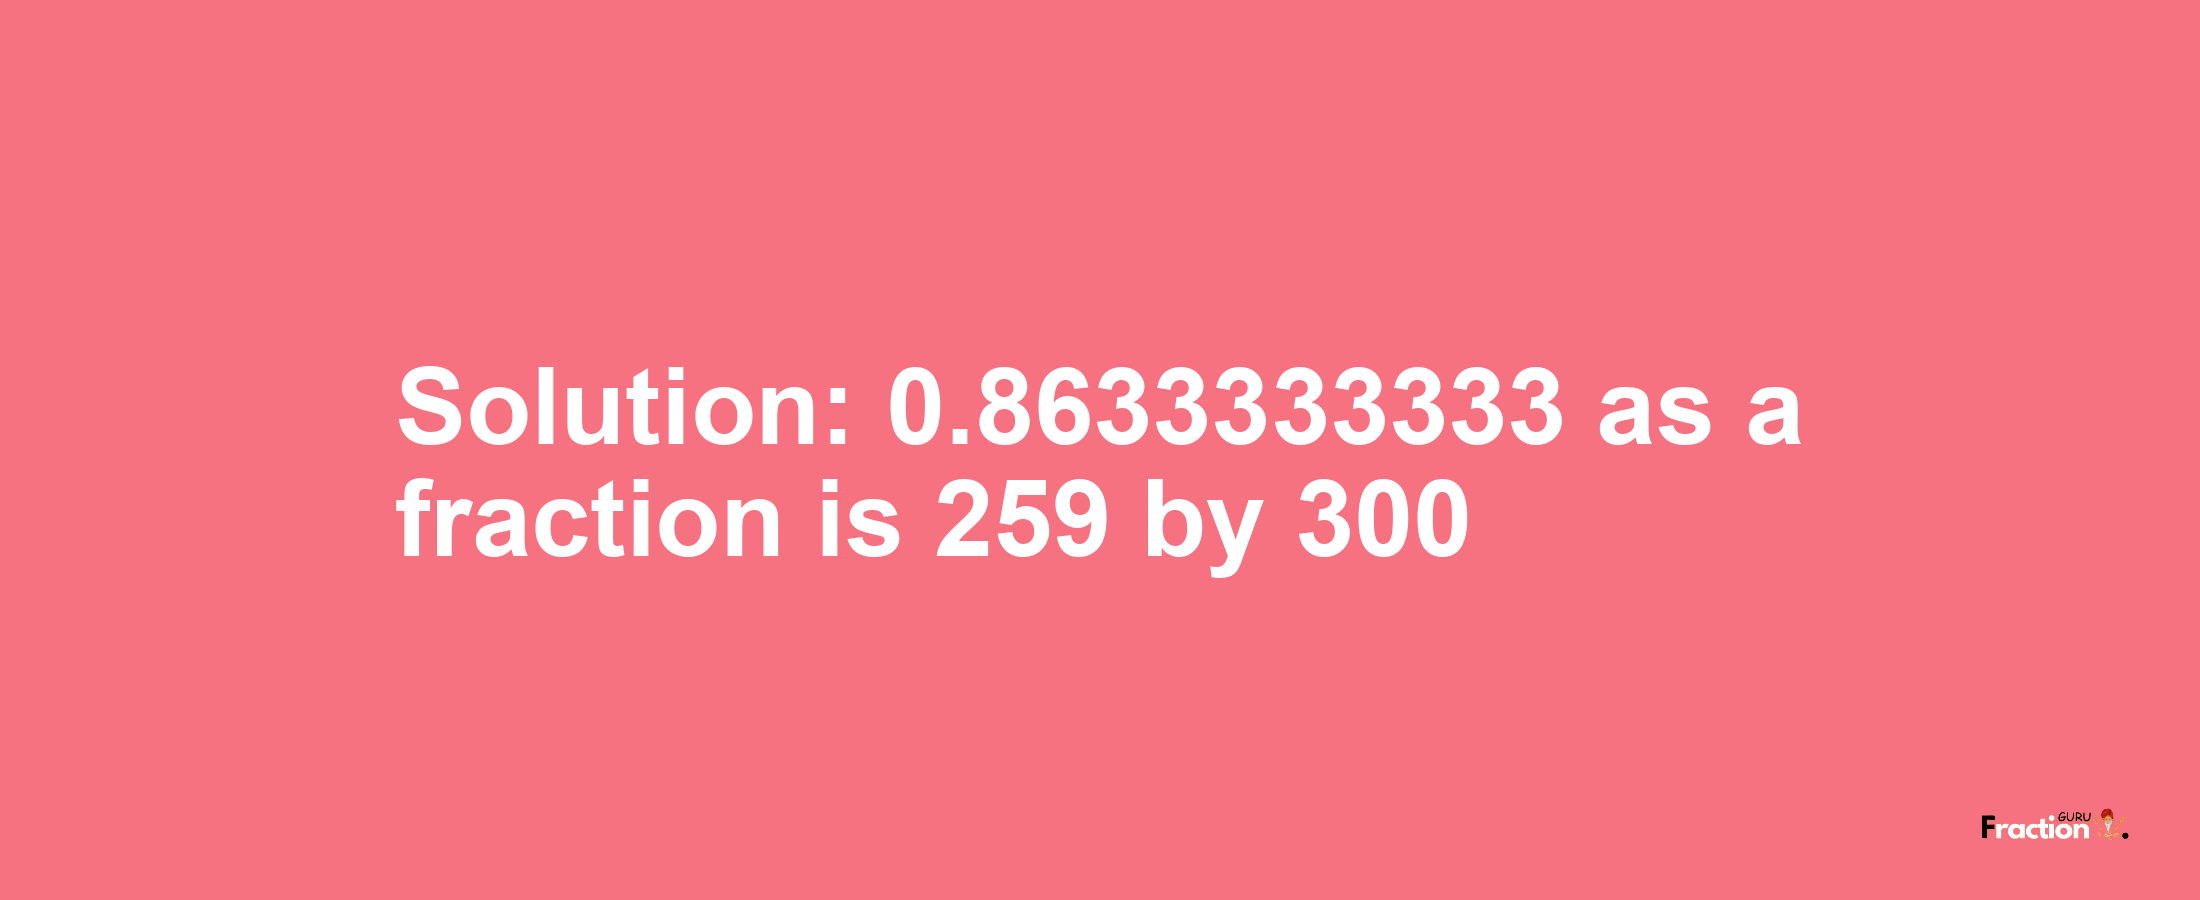 Solution:0.8633333333 as a fraction is 259/300